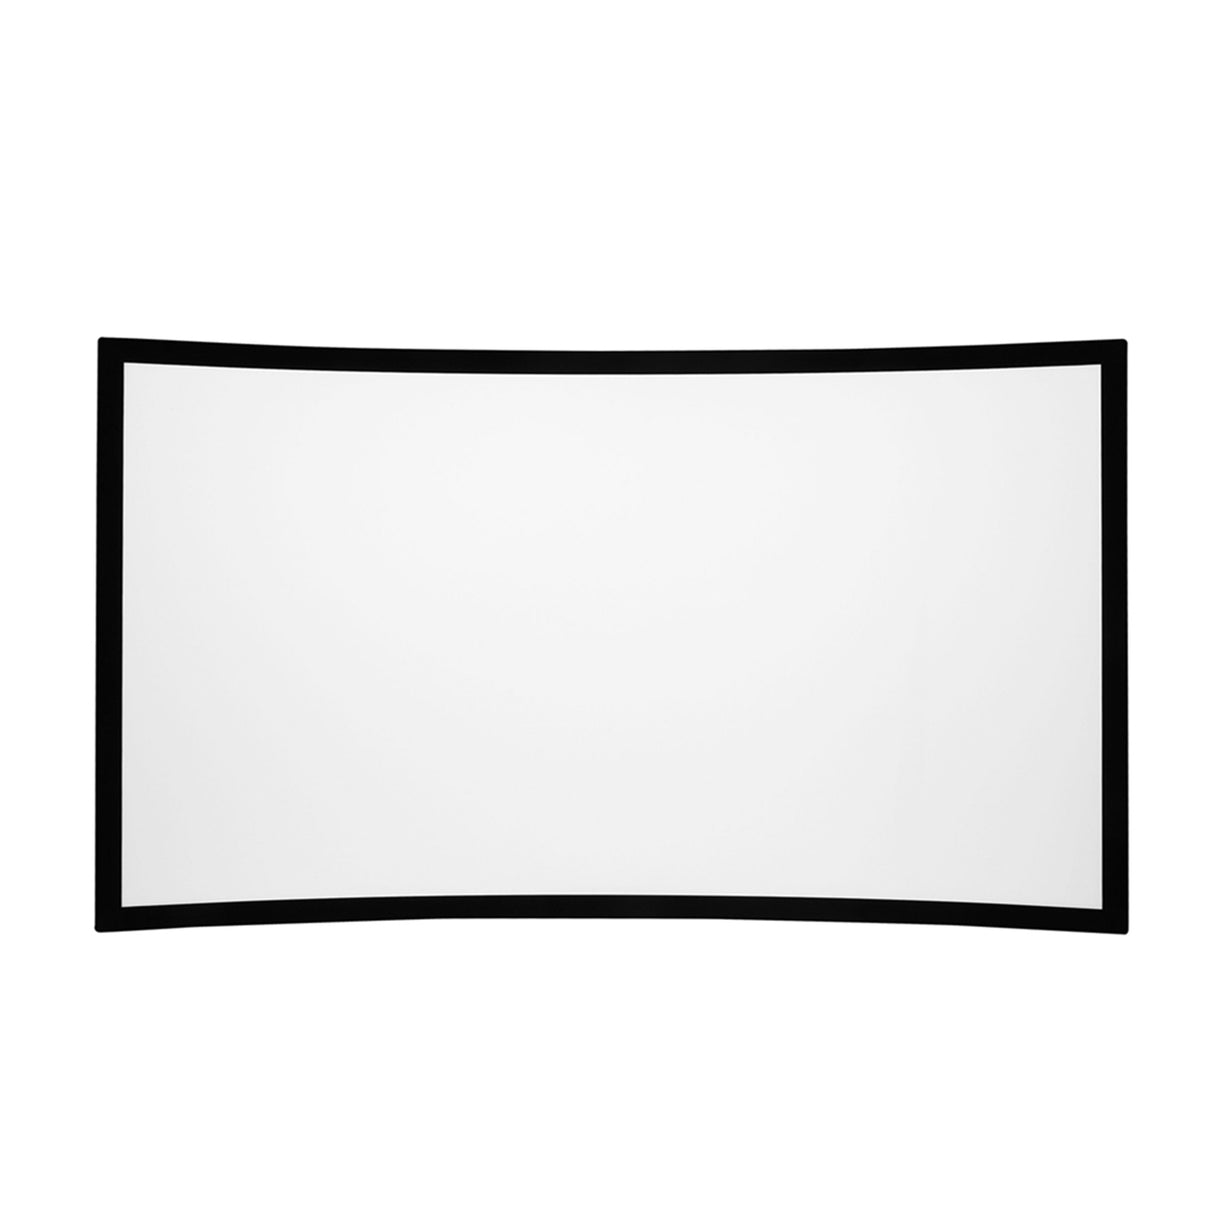 Prime Fixed-frame Curved projector screen with acoustically transparent perforated white fabric (110")